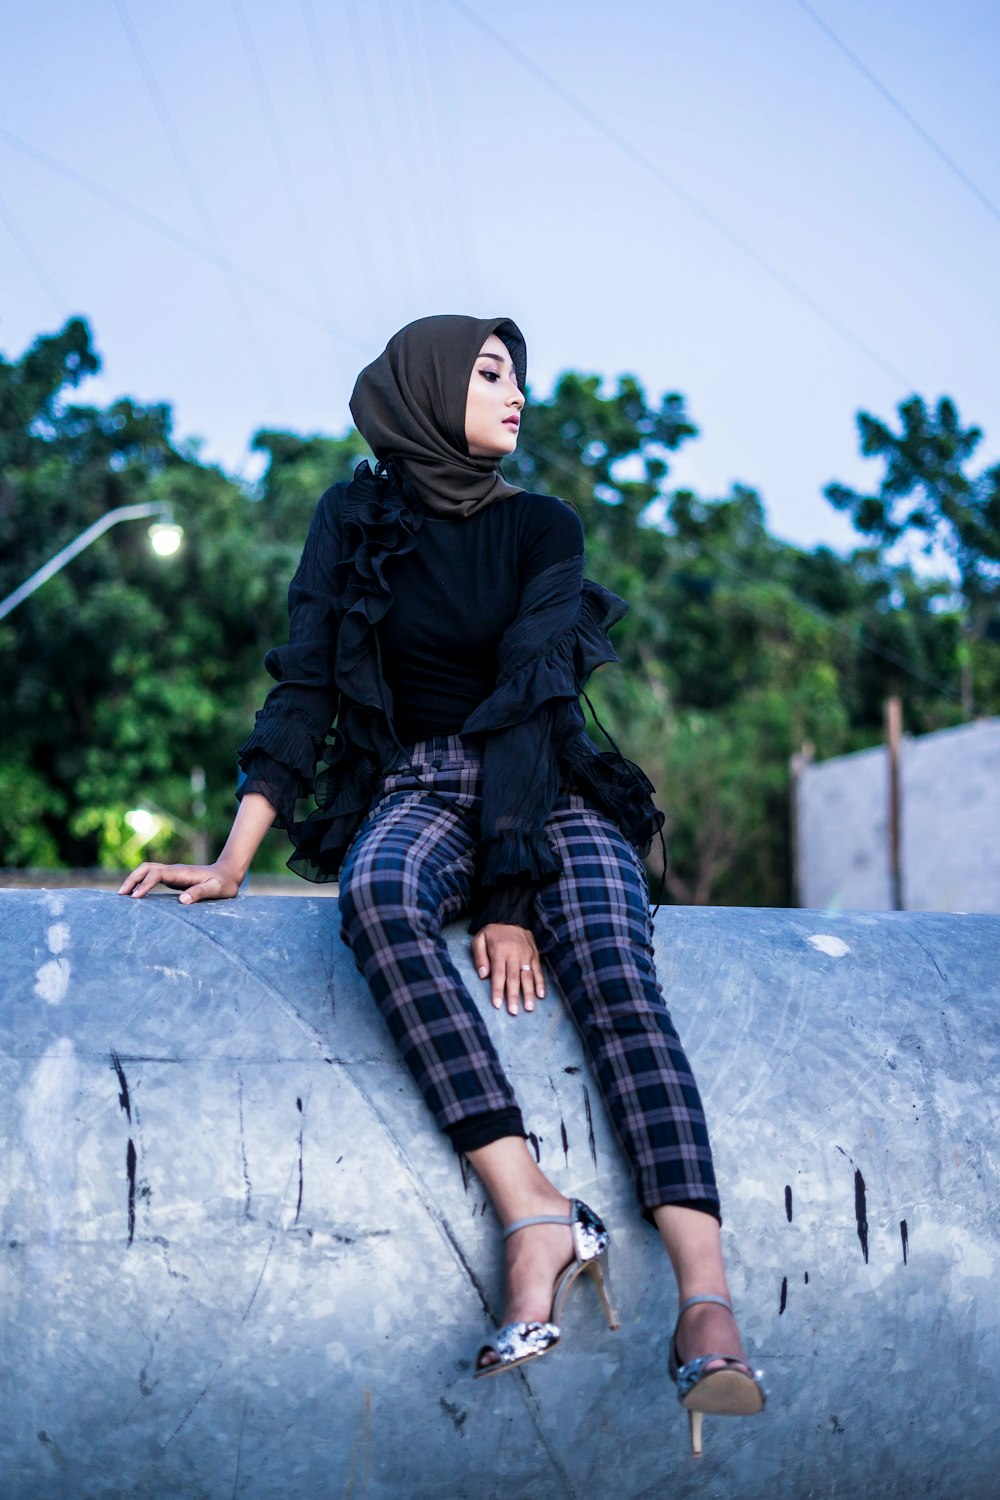 woman in black hijab and black and white plaid pants sitting on concrete bench during daytime